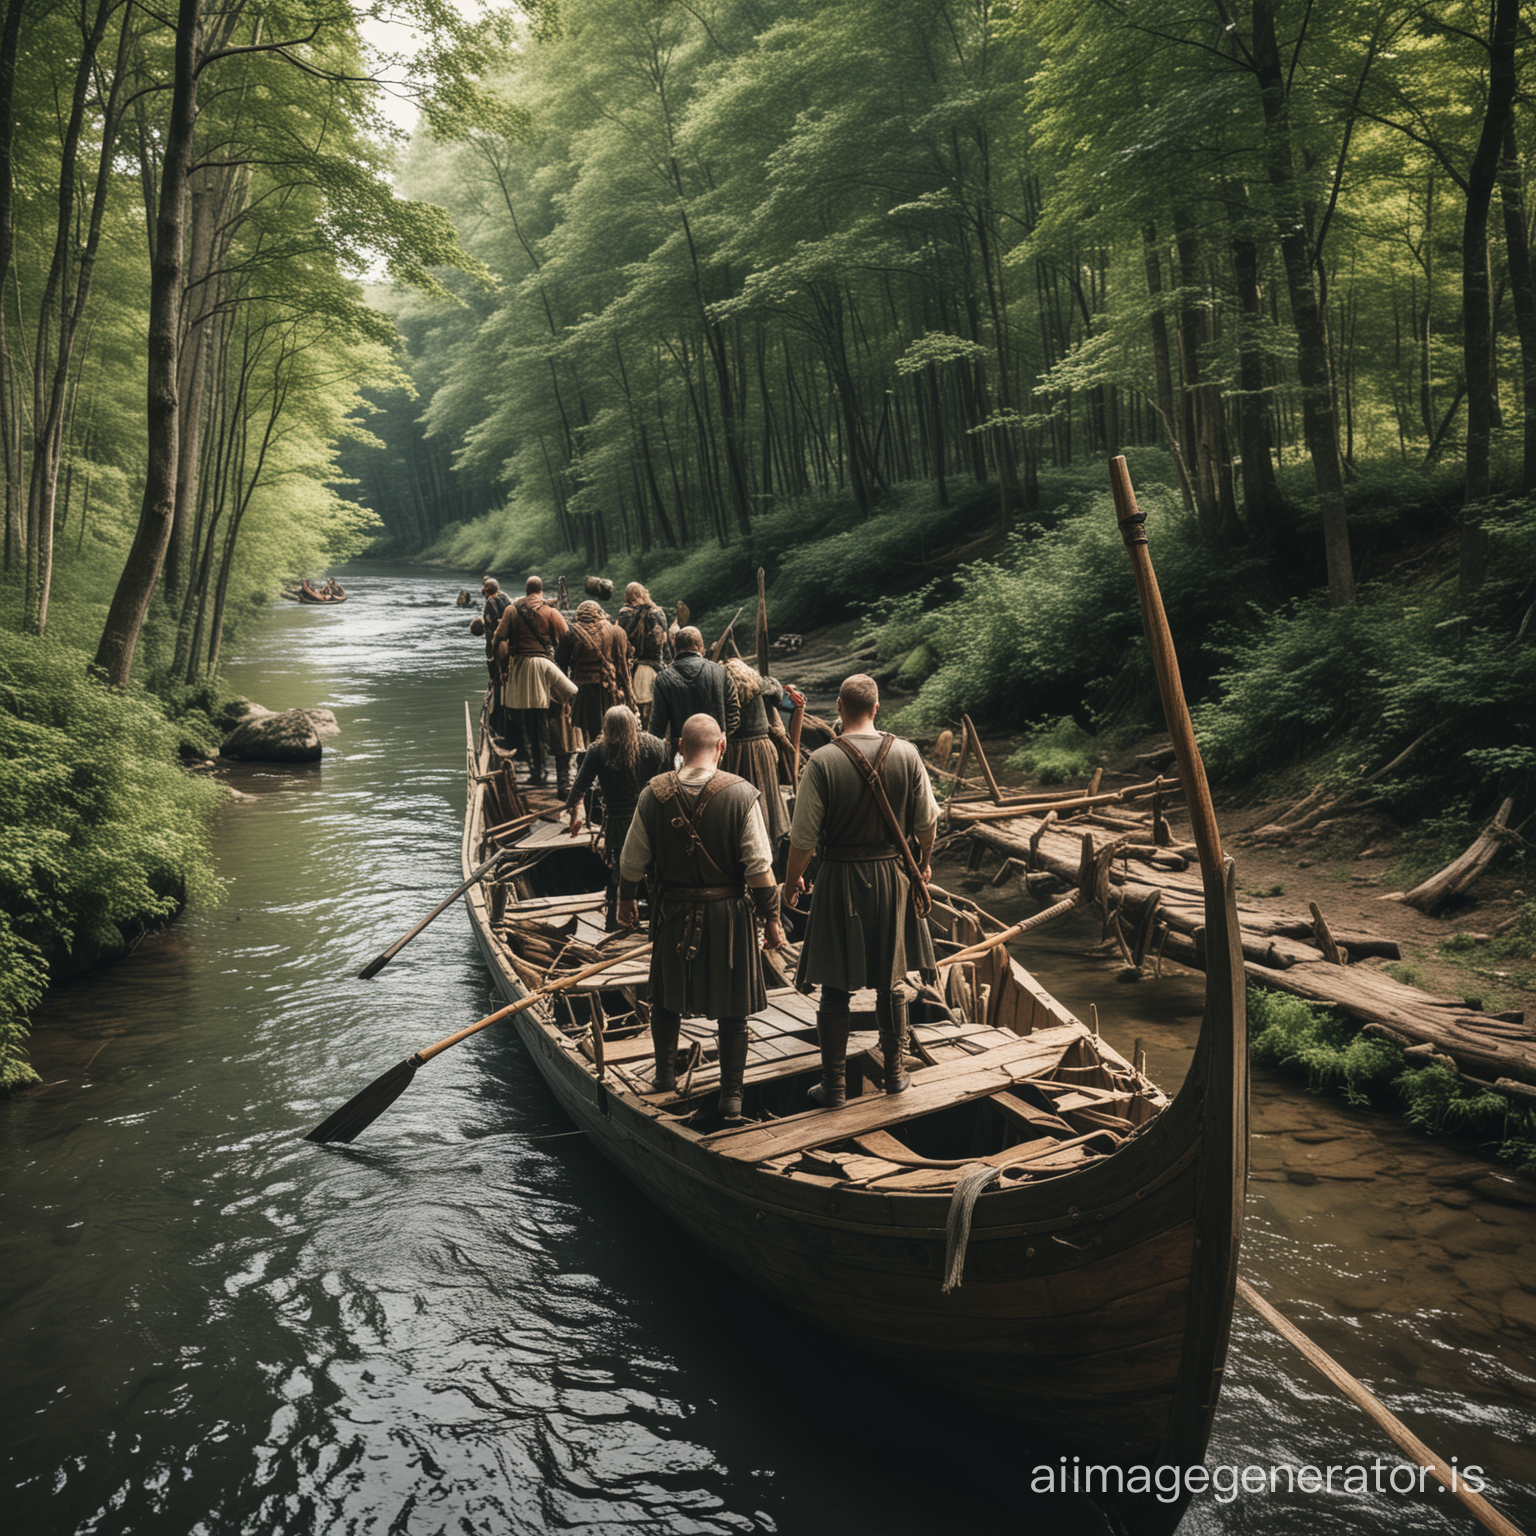 armed medieval  shaved worriers disembarking from Viking  boat  river forest